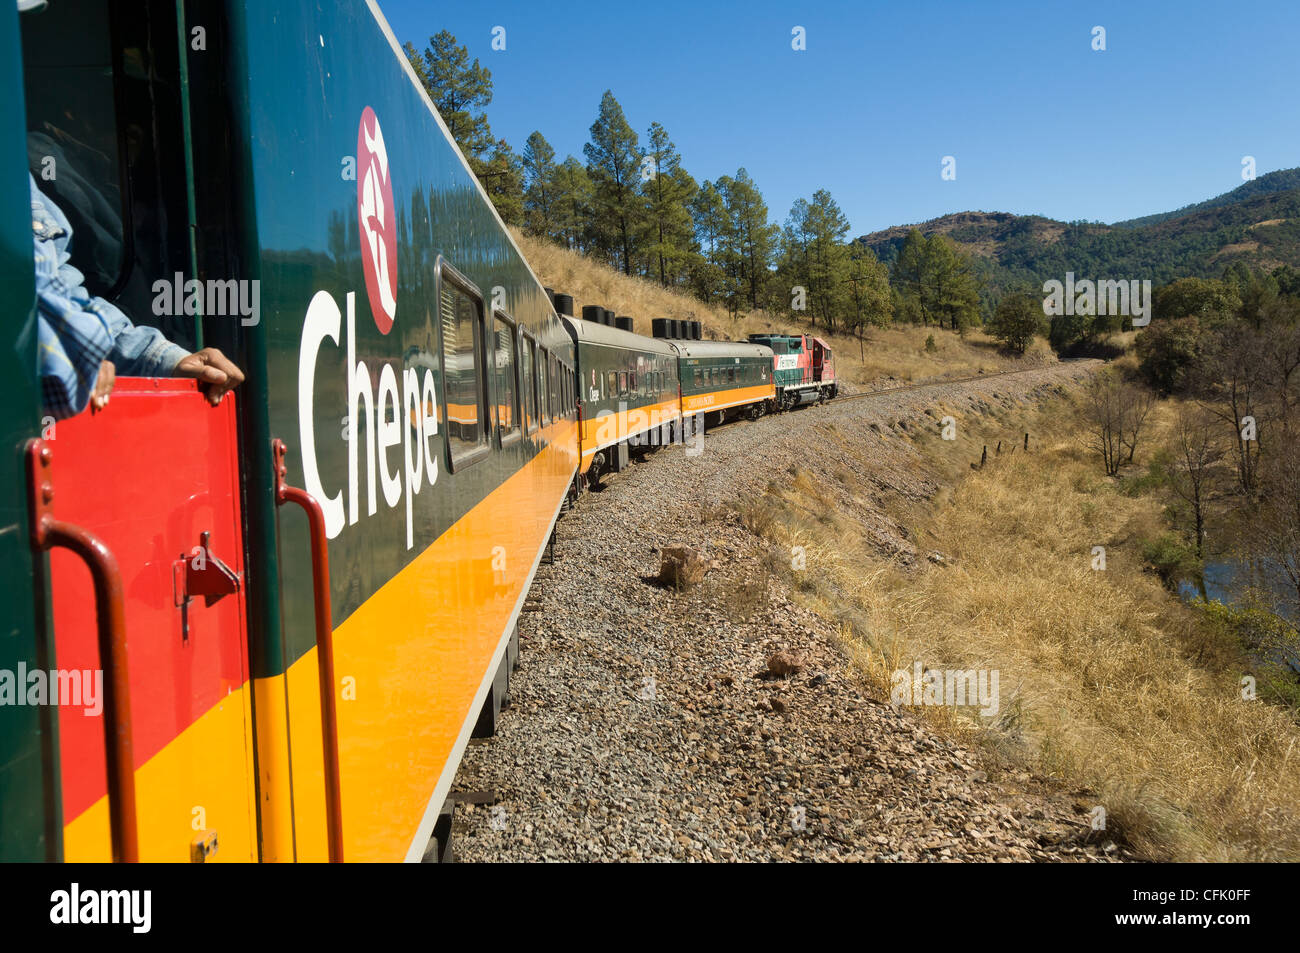 Chihuahua Pacific Railroad train 'Chepe', en route from El Fuerte to Copper Canyon, Mexico. Stock Photo